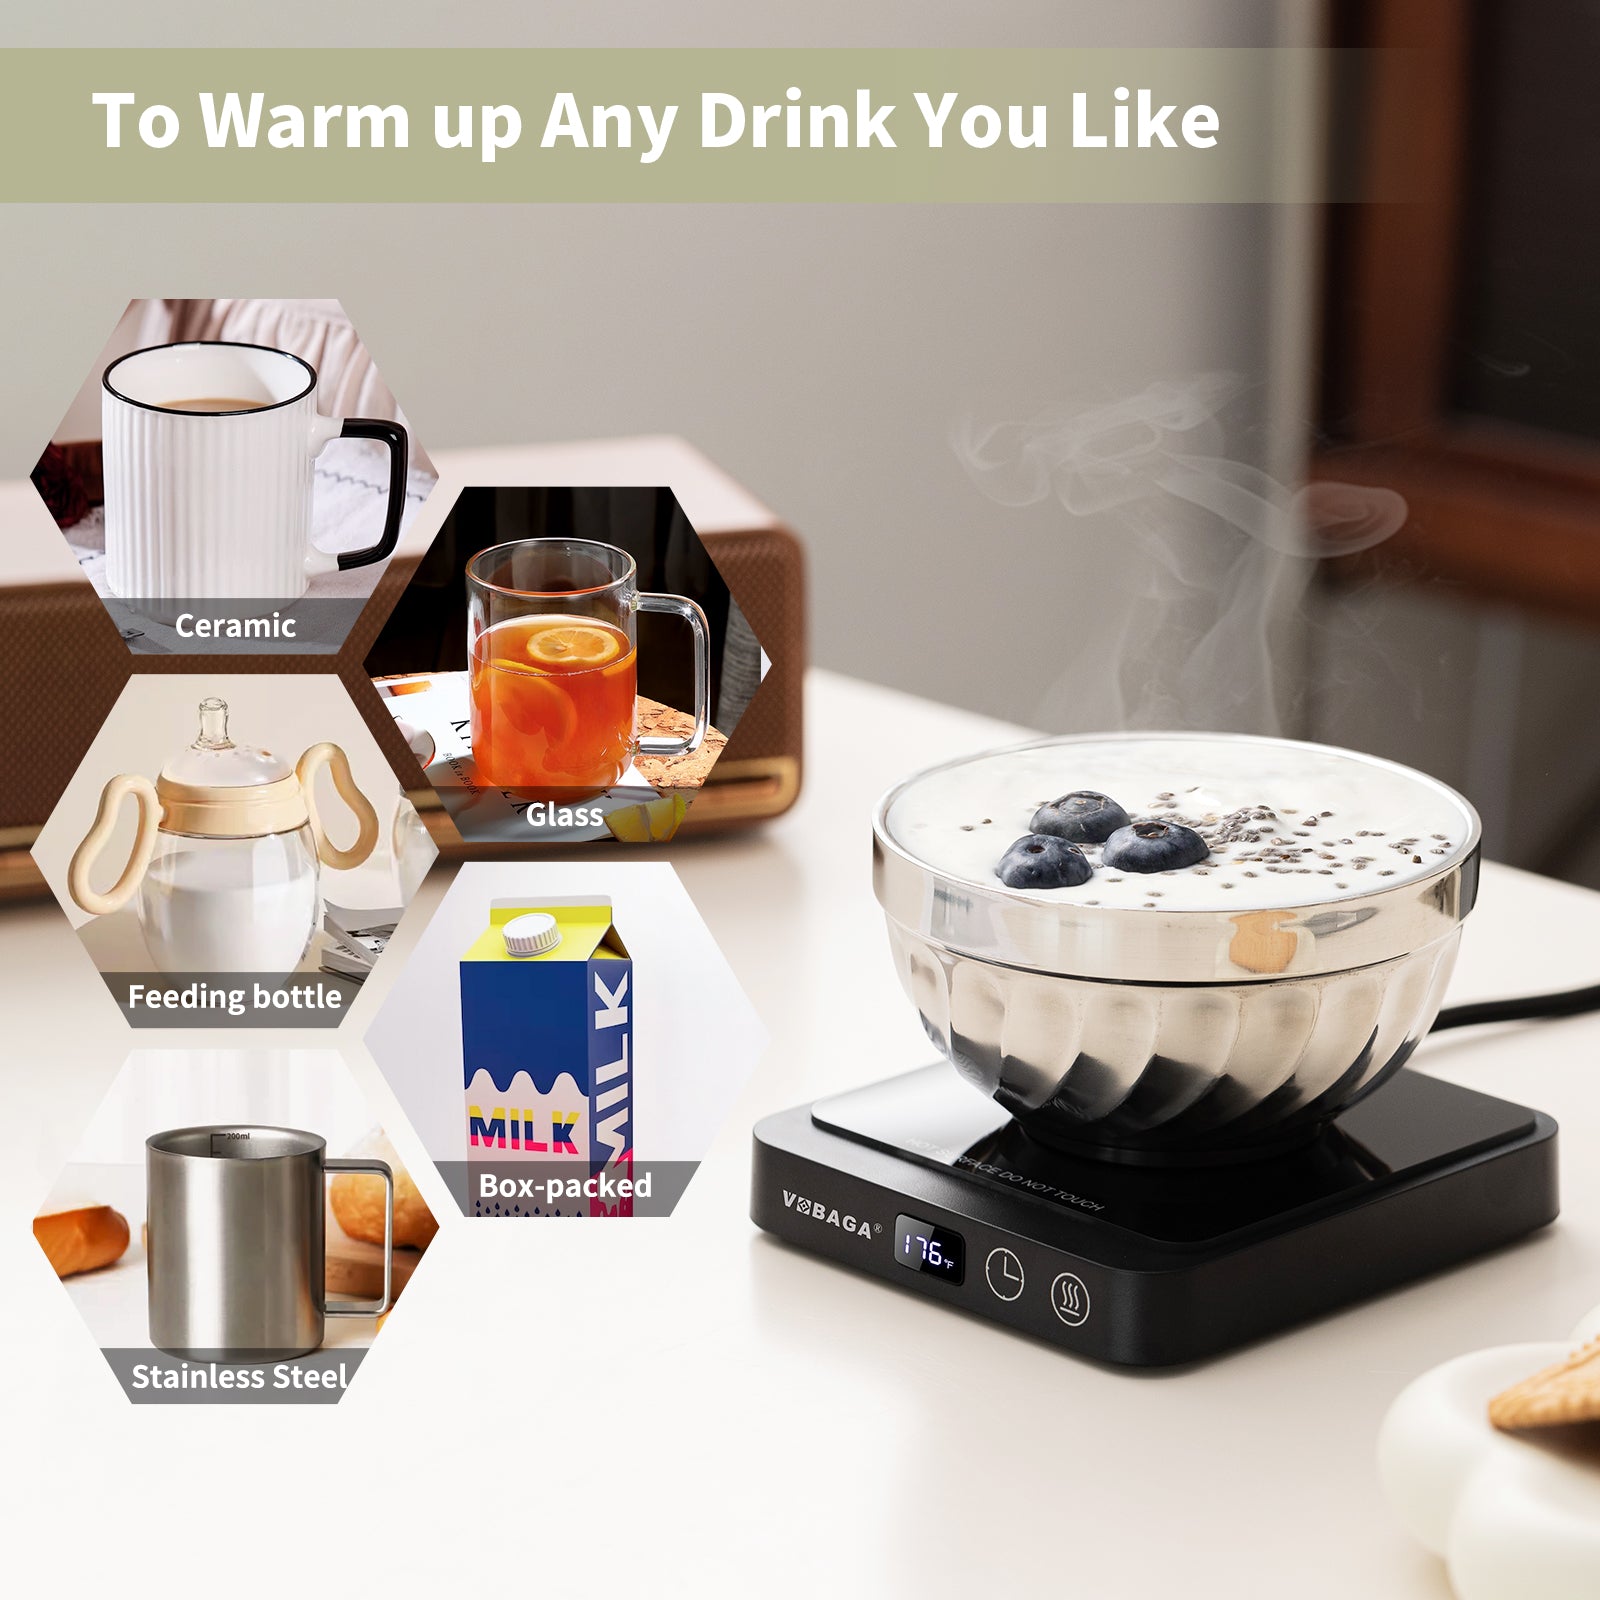 VOBAGA Mug Warmer, Coffee Cup Warmer for Office Home Desk Use with 5 Temperature Settings, Electric Beverage Warmer with Digital Display Auto Shut Off for Heating Coffee, Cocoa, Milk, Tea(No Cup)